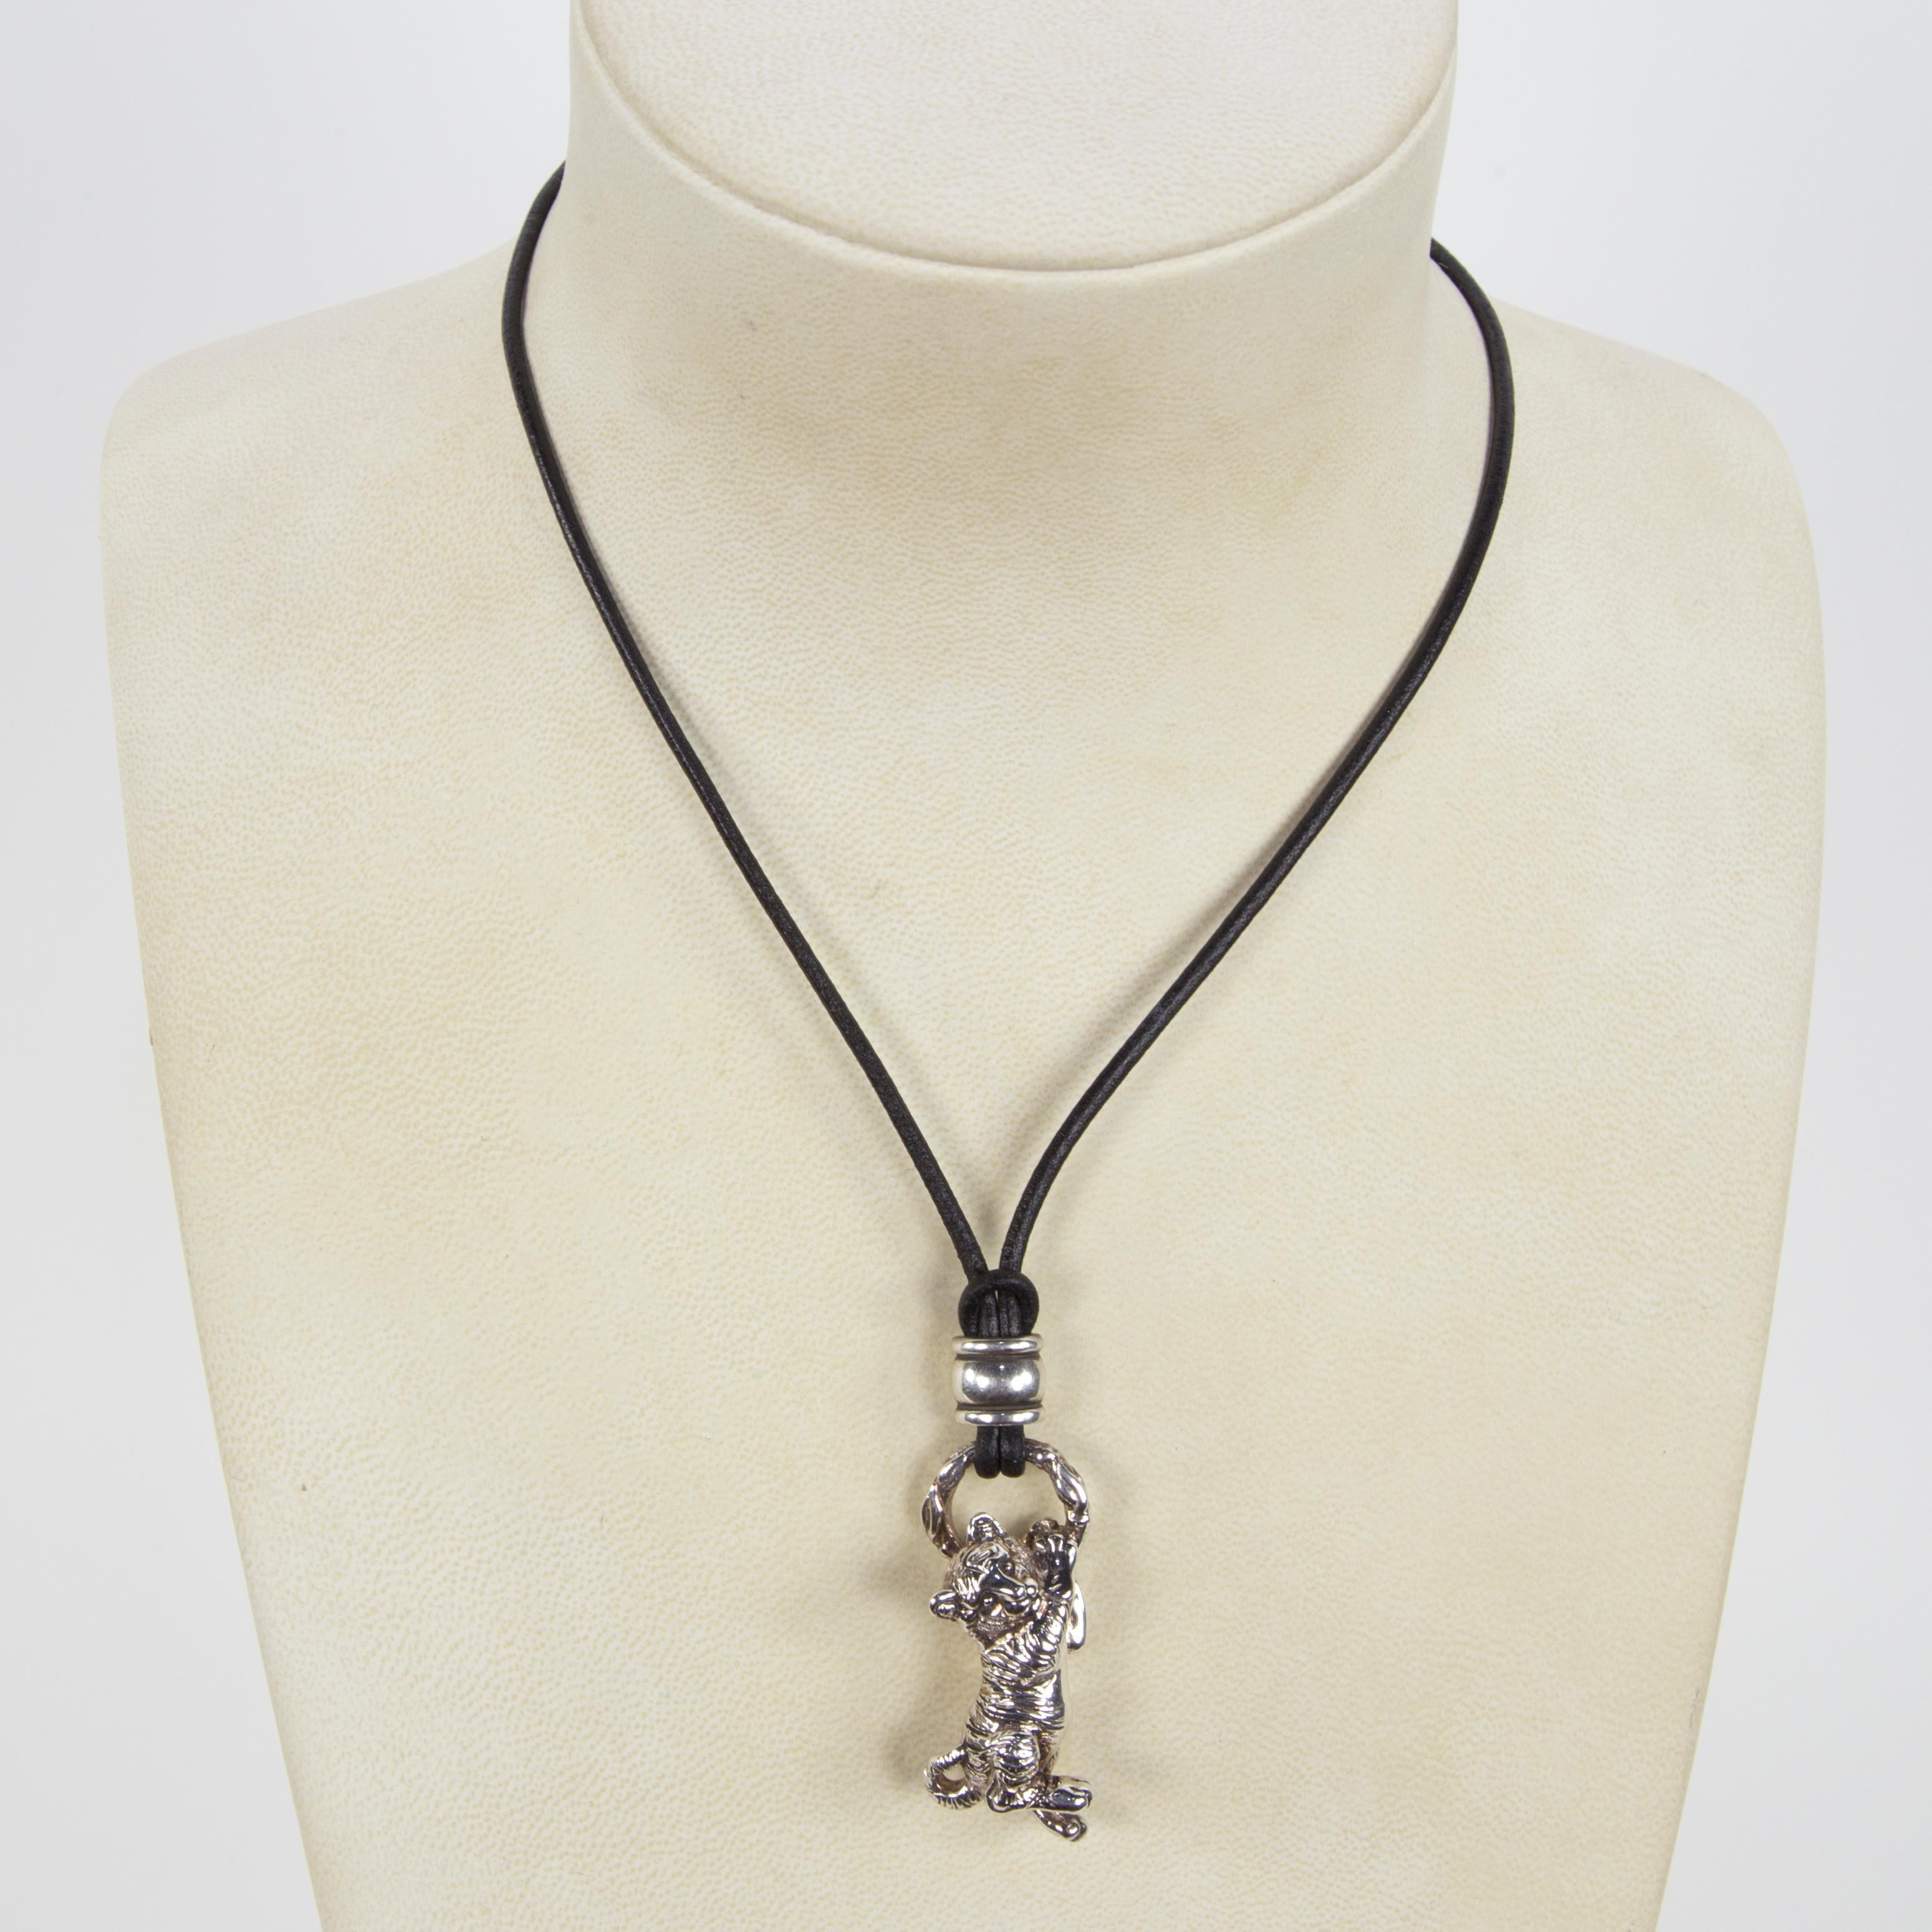 Featuring a delightfulrful Tiger Cub Pendant crafted in Sterling Silver, suspended from a leather cord; approx. 18